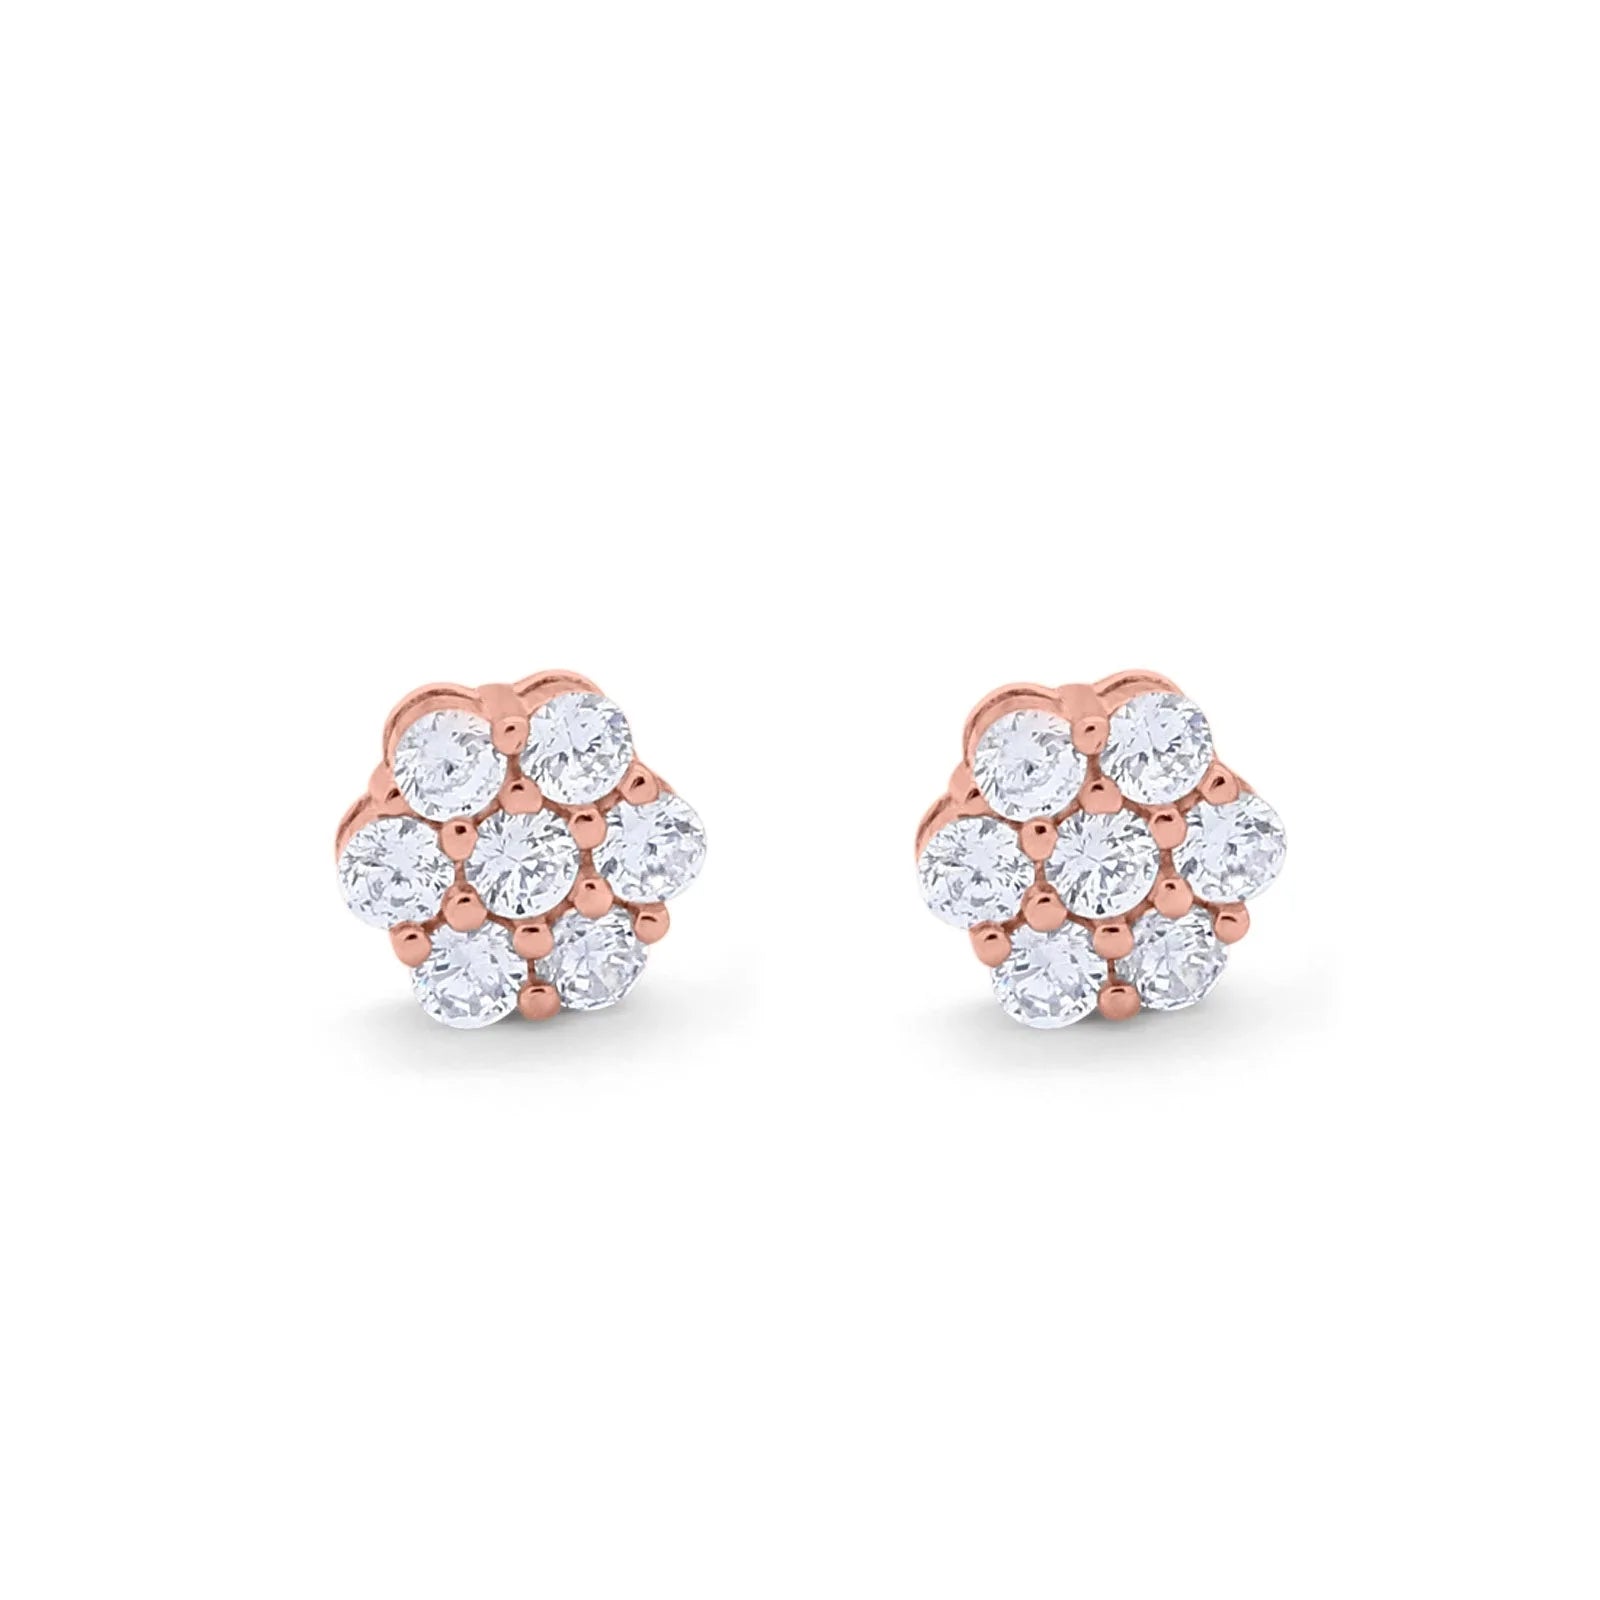 14K Gold Round Flower Simulated Cubic Zirconia Stud Earrings